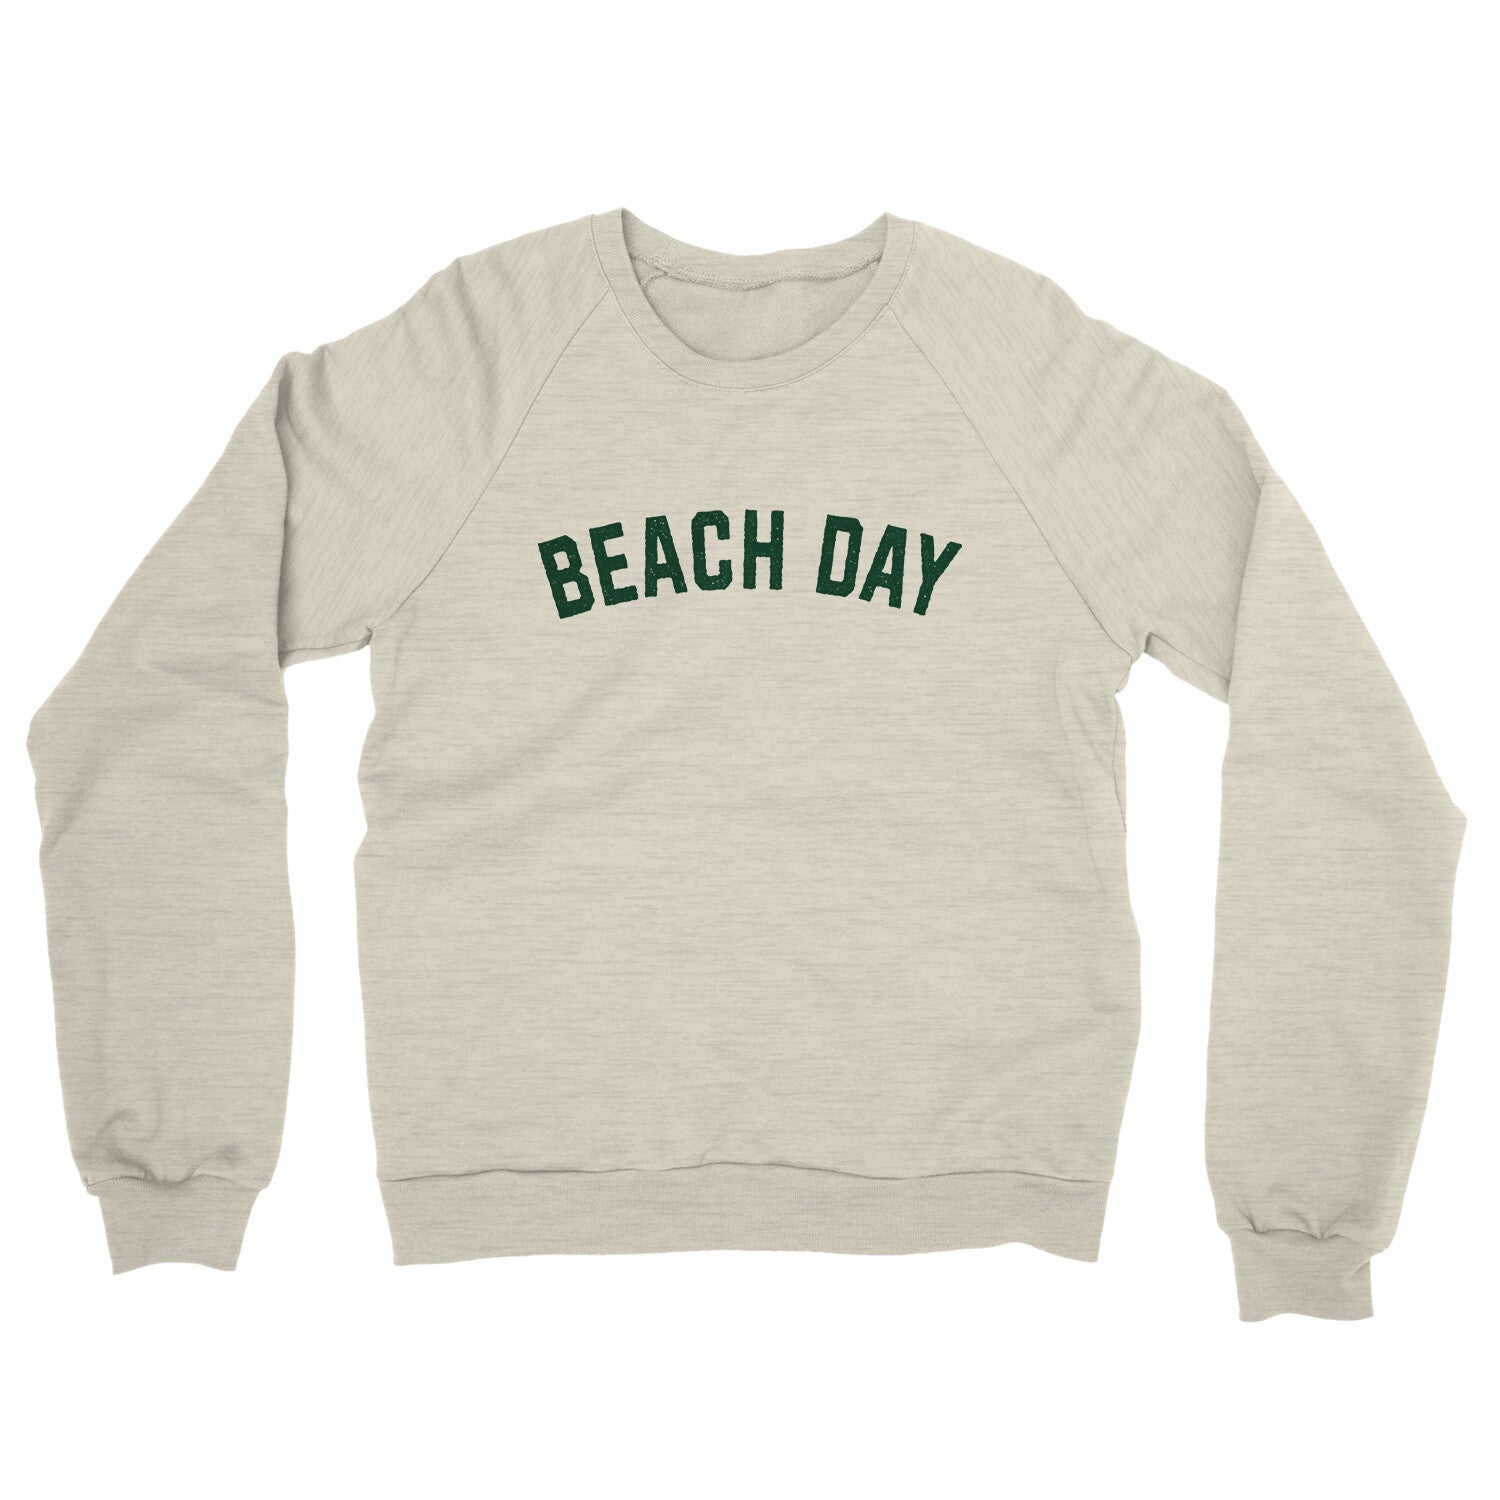 Beach Day in Heather Oatmeal Color